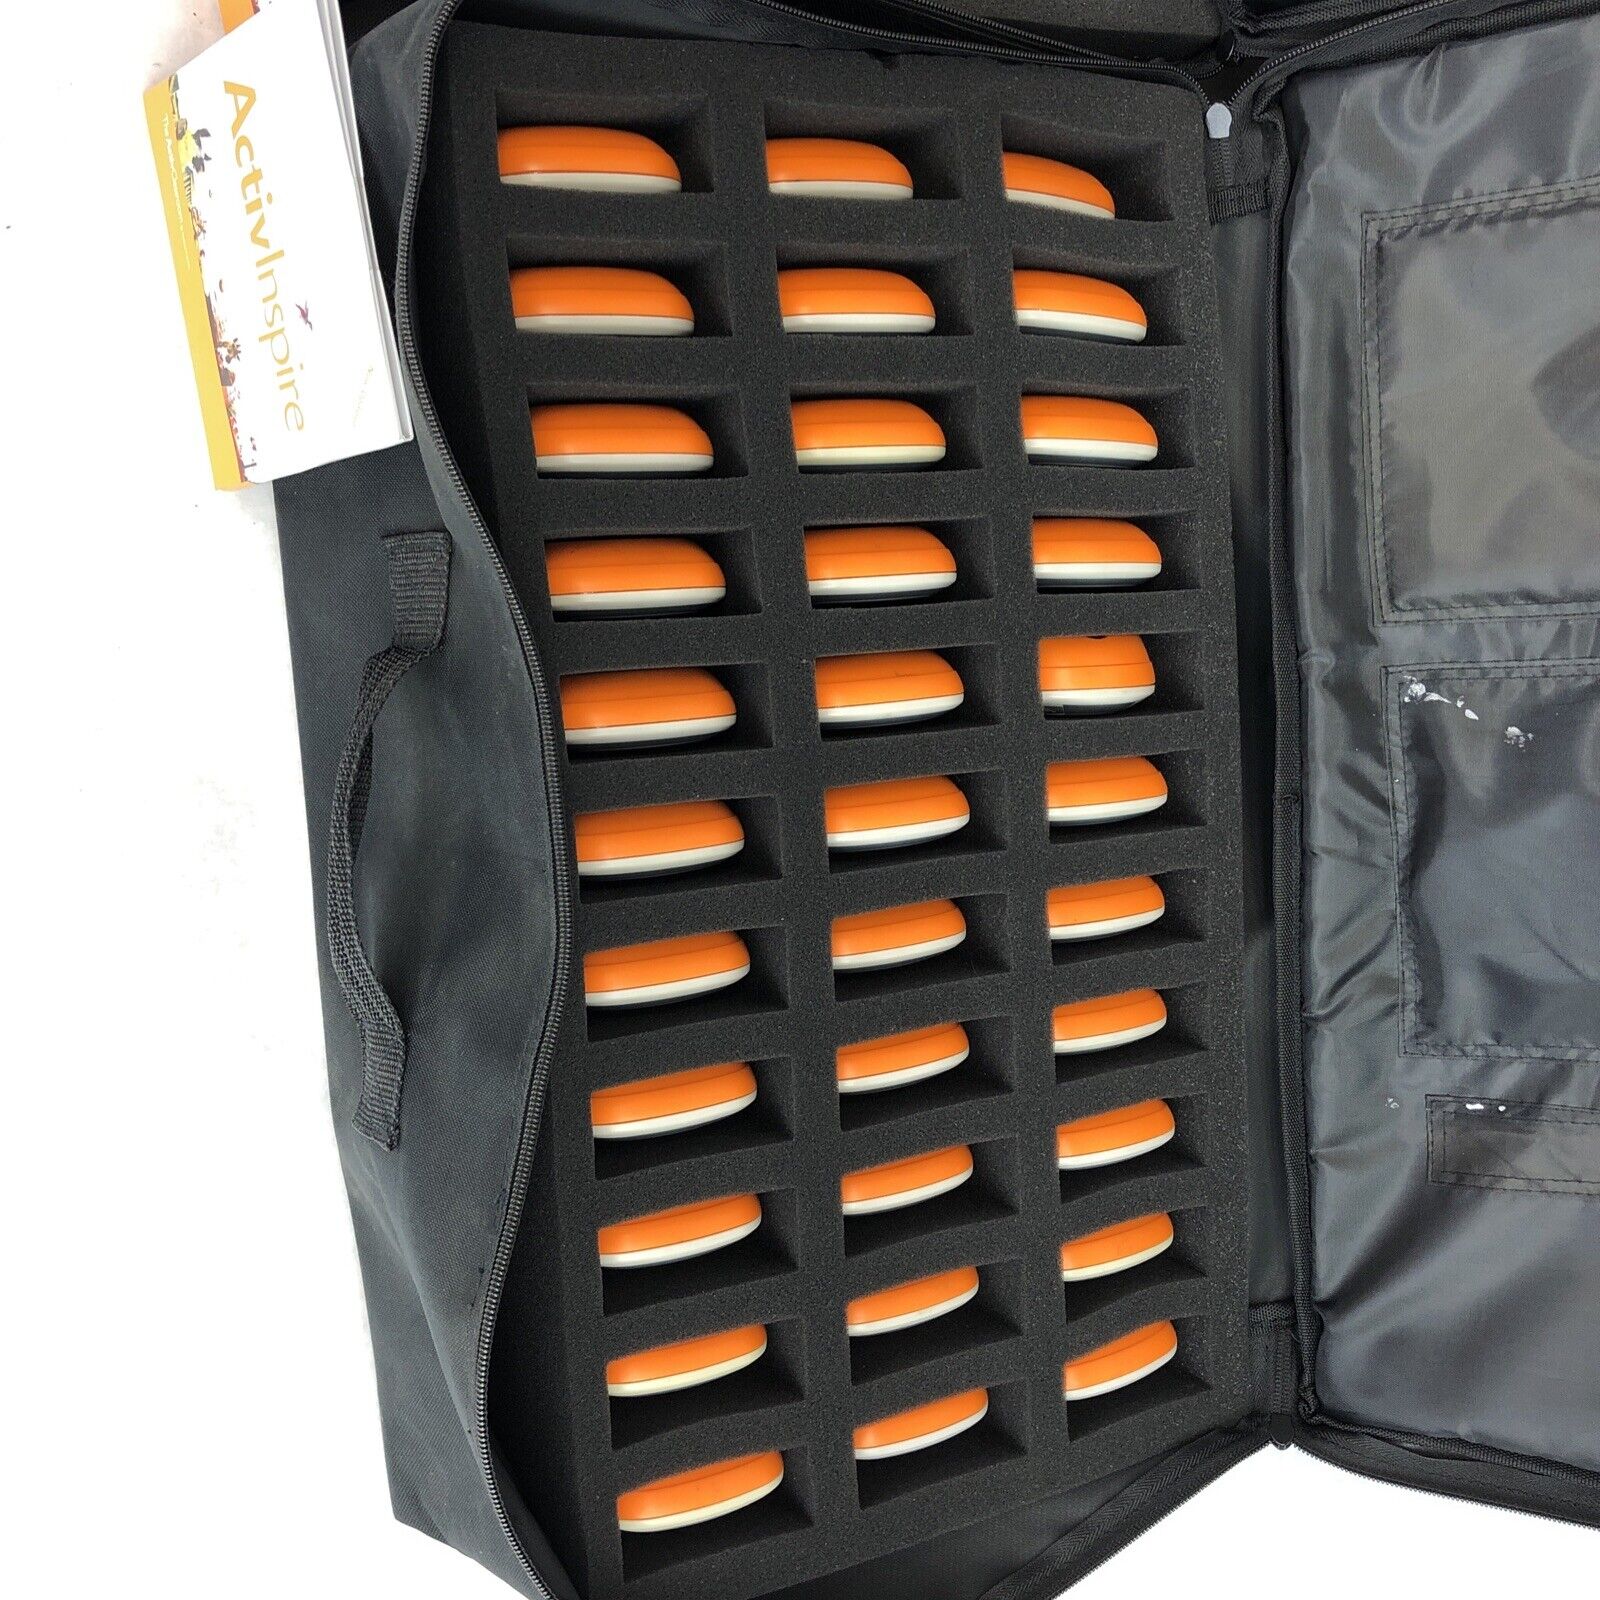 2 Sets of 33 Promethean ActivExpression PRM-AE1-01 Remotes With Carrying Cases